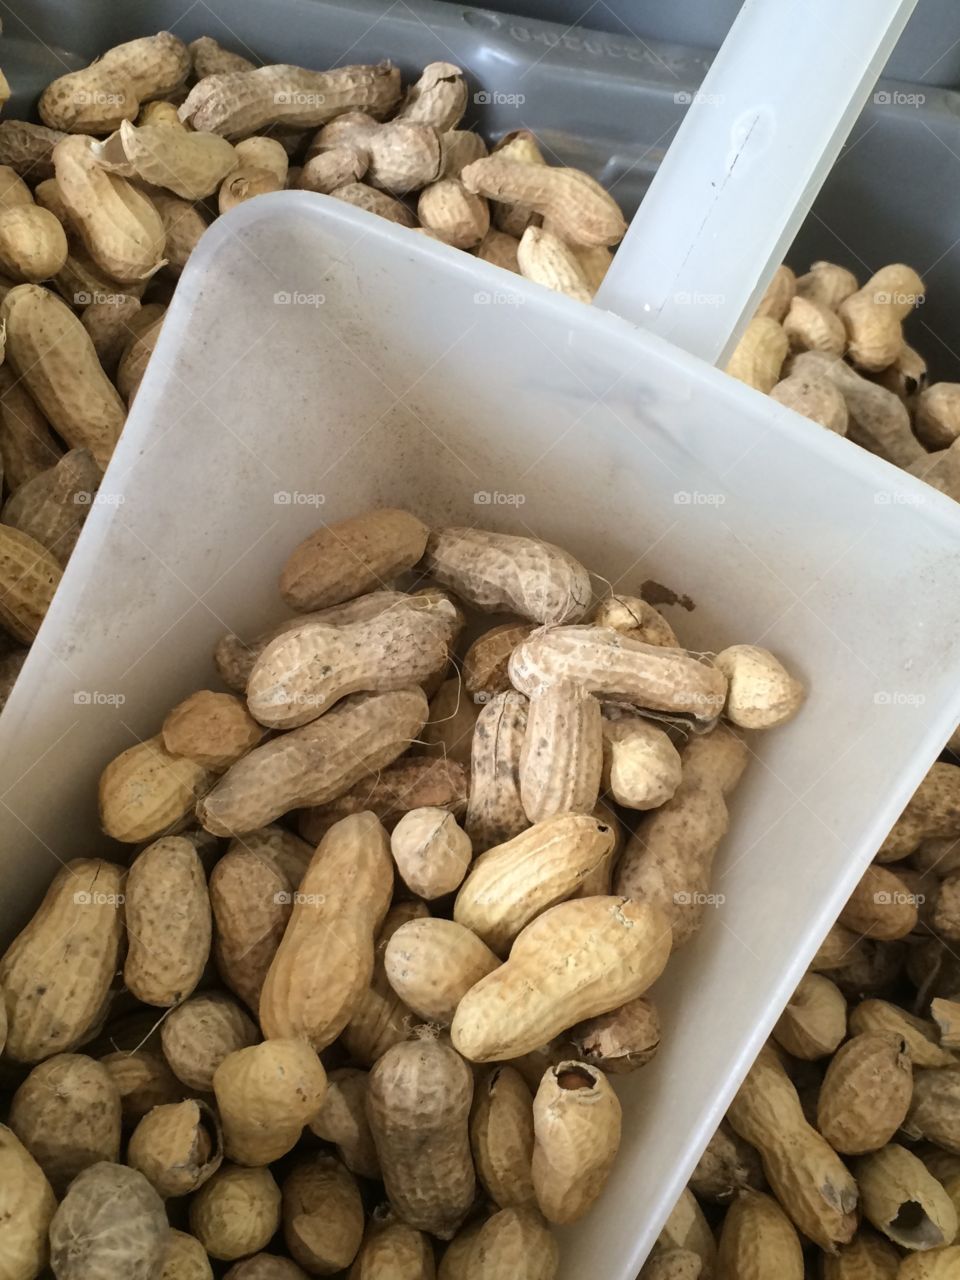 Peanuts for sale. 